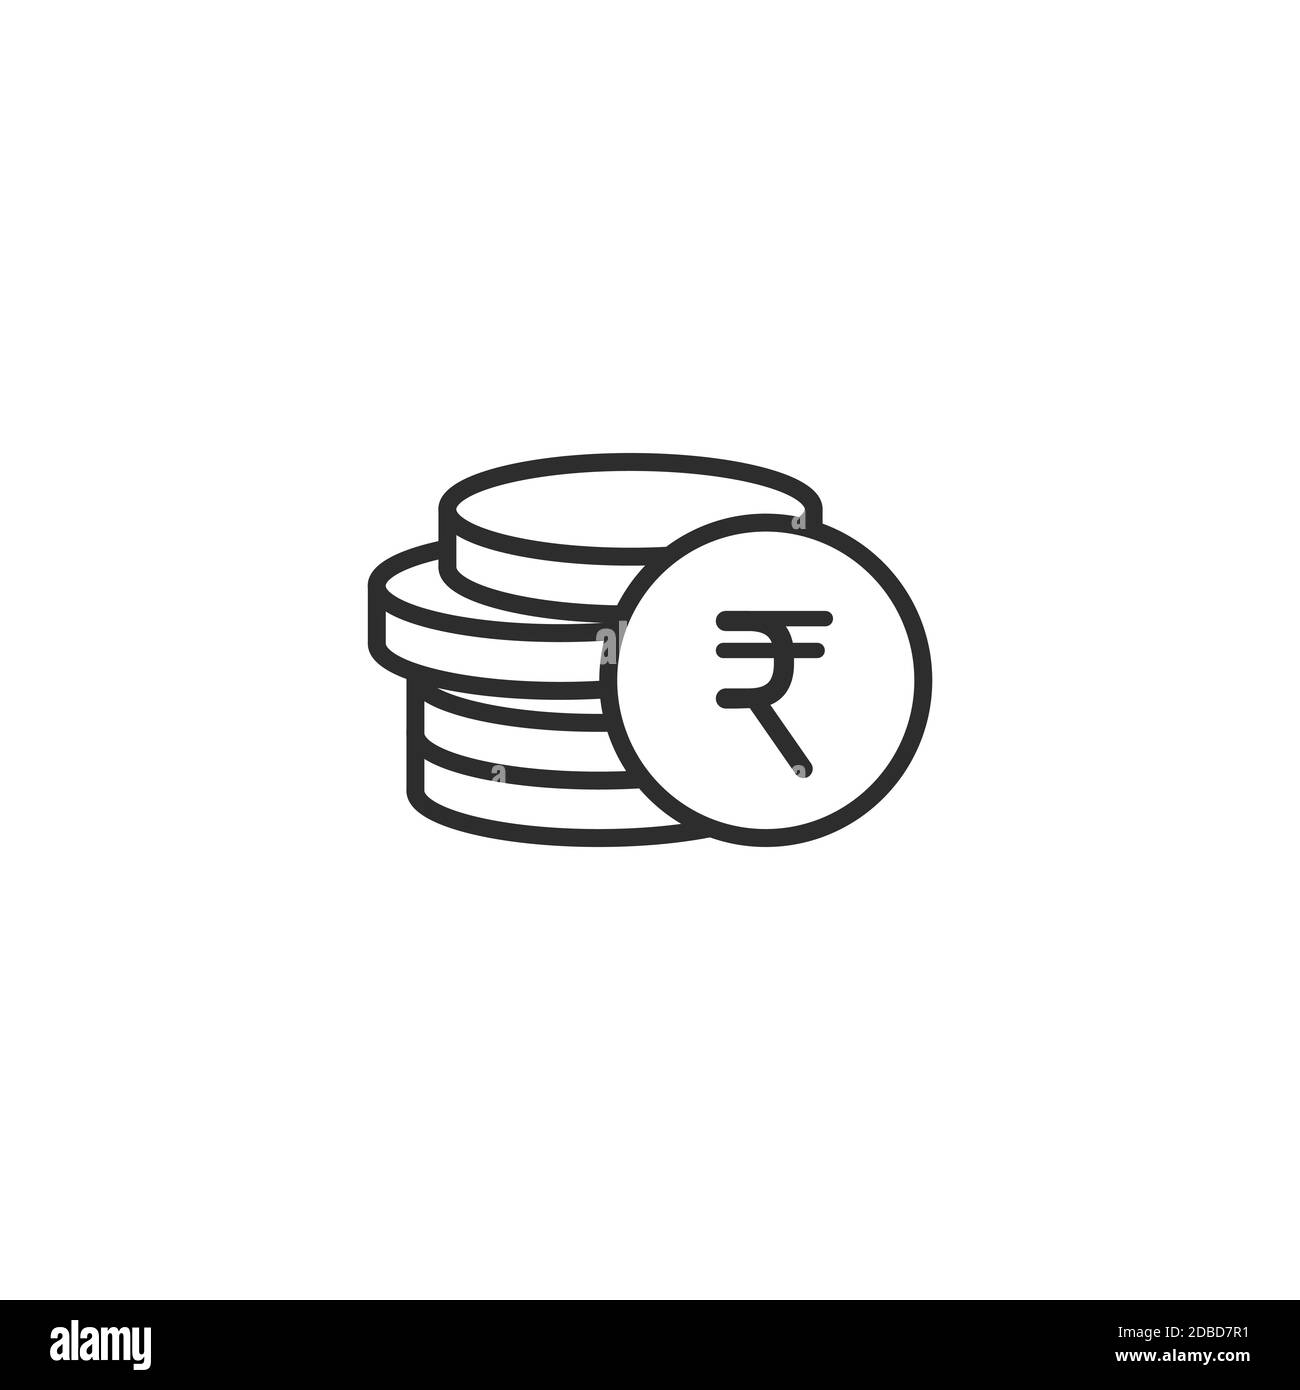 Stack of rupee coins with coin in front of it. Flat black line icon. Isolated on white. Economy, finance, money pictogram. Wealth symbol. Vector illus Stock Vector